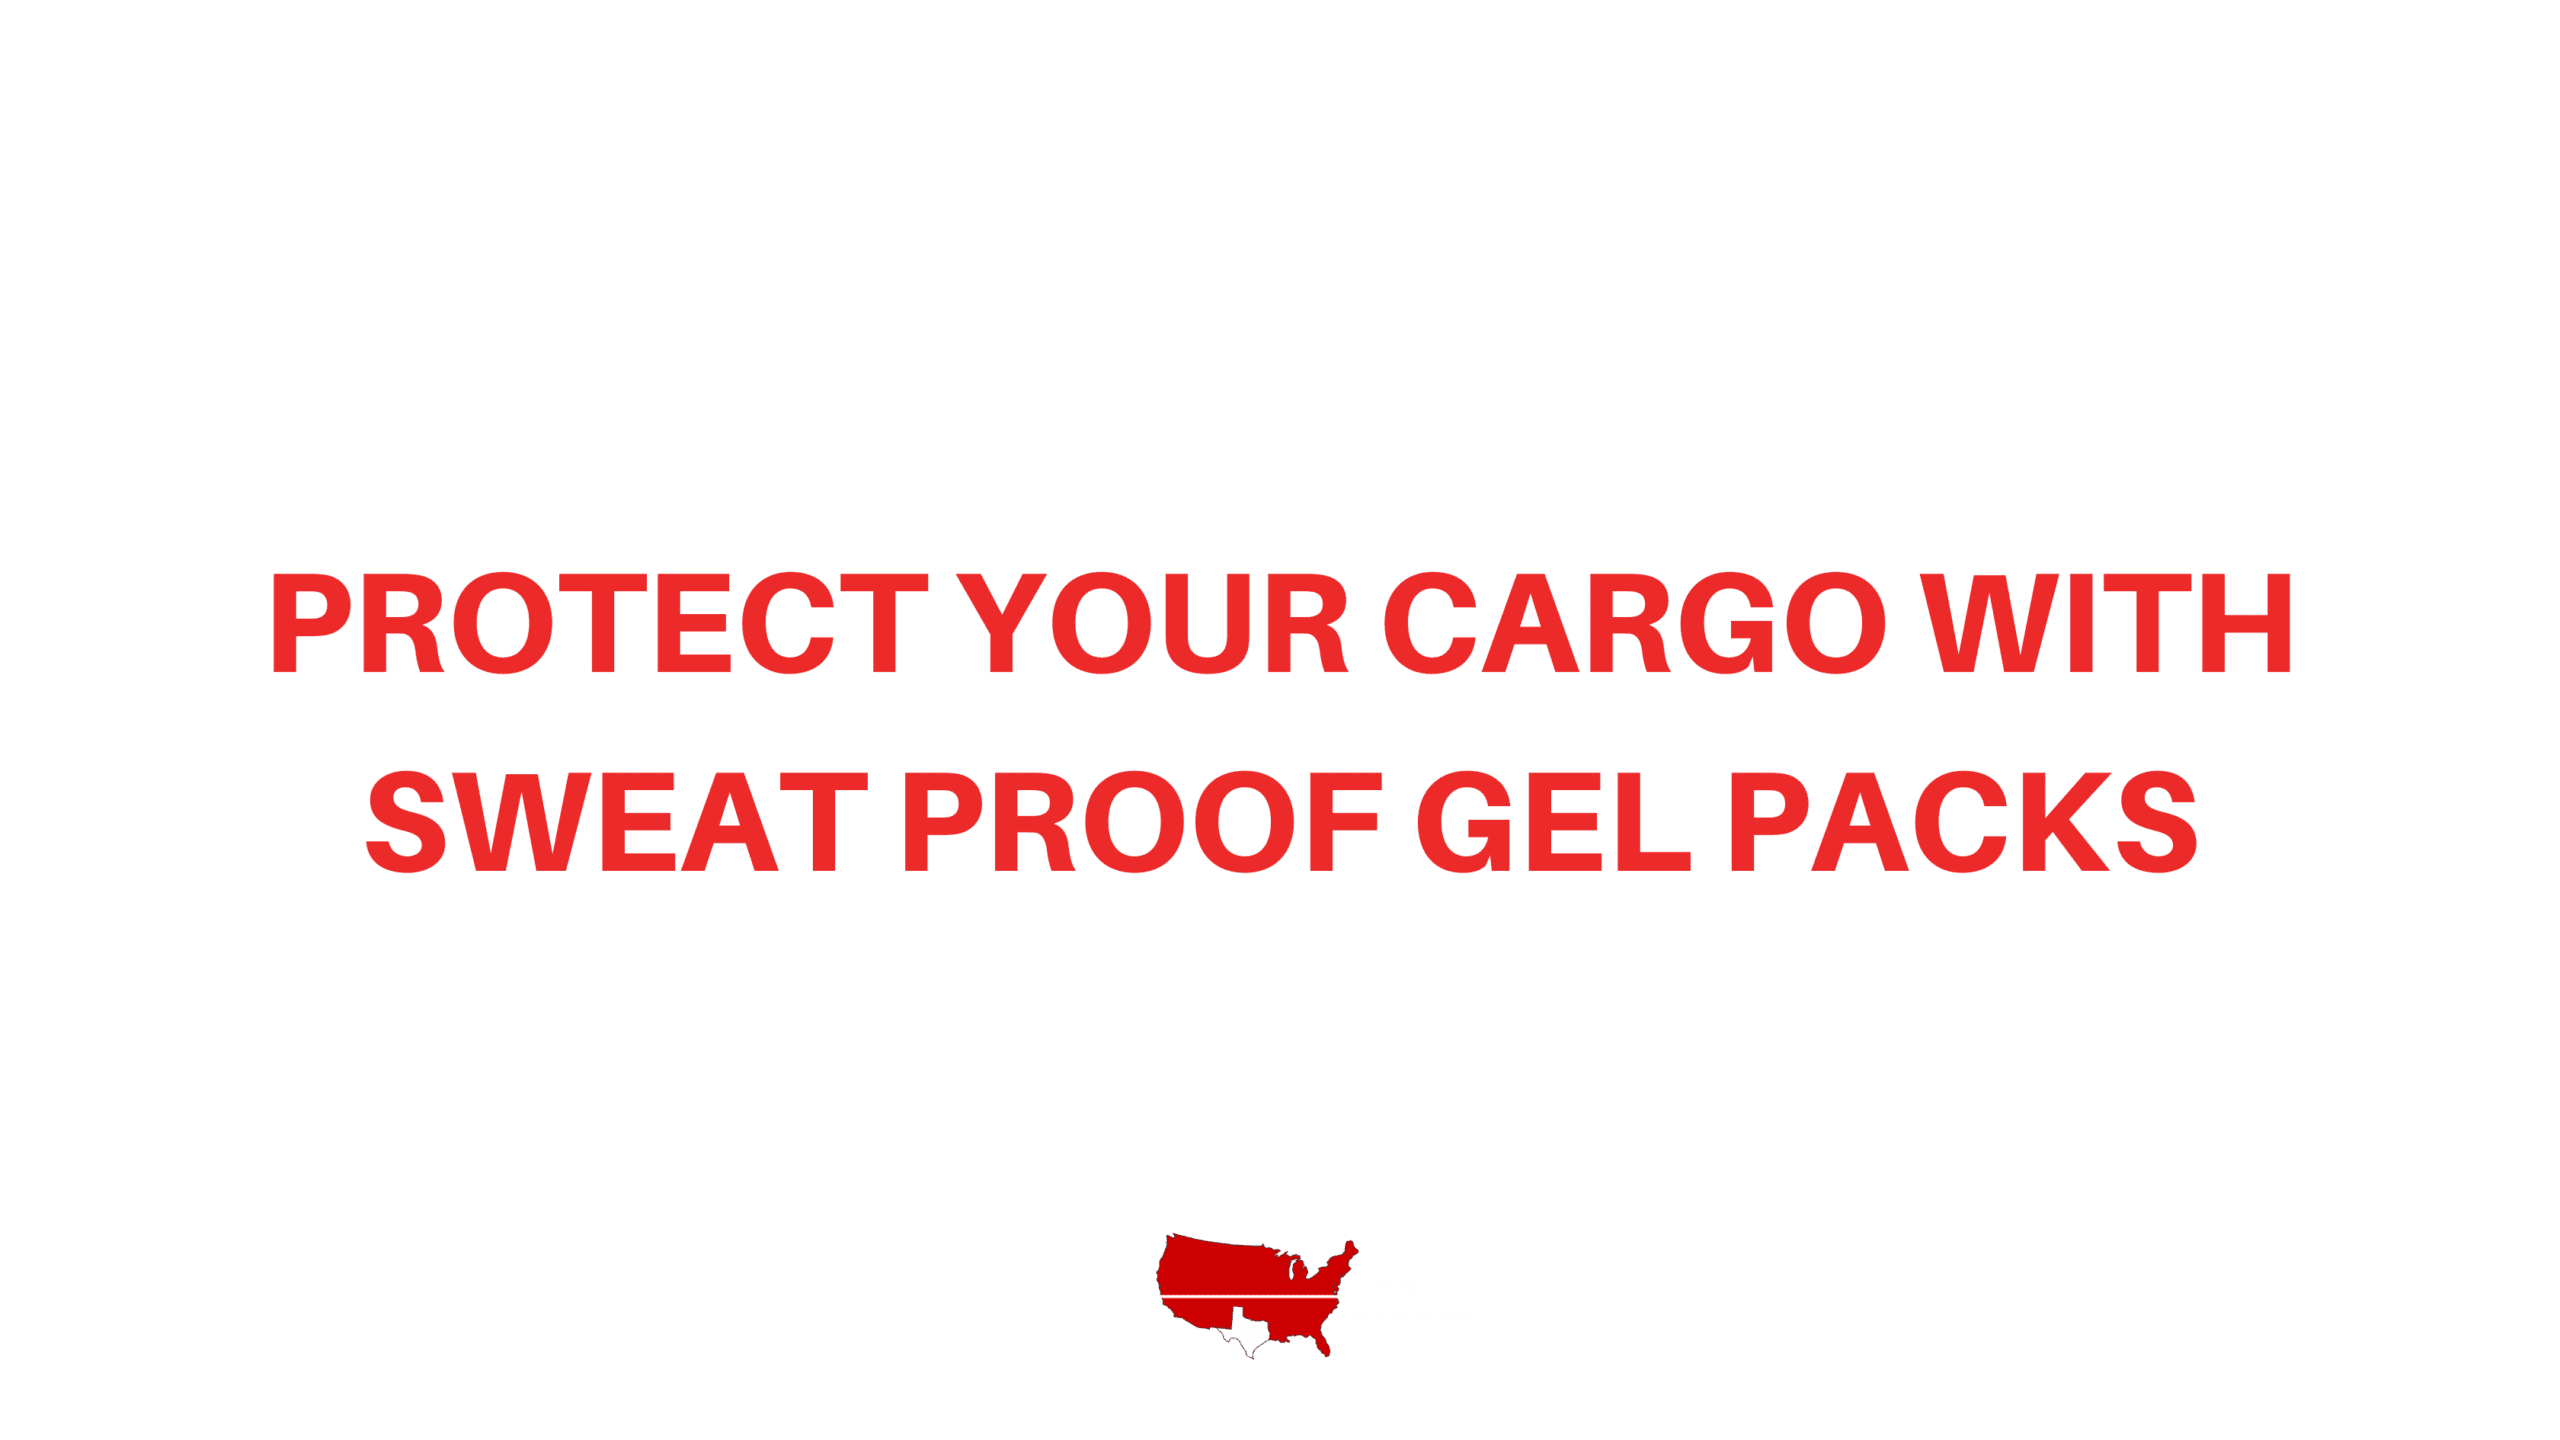 Protect Your Cargo with Sweat Proof Gel Packs